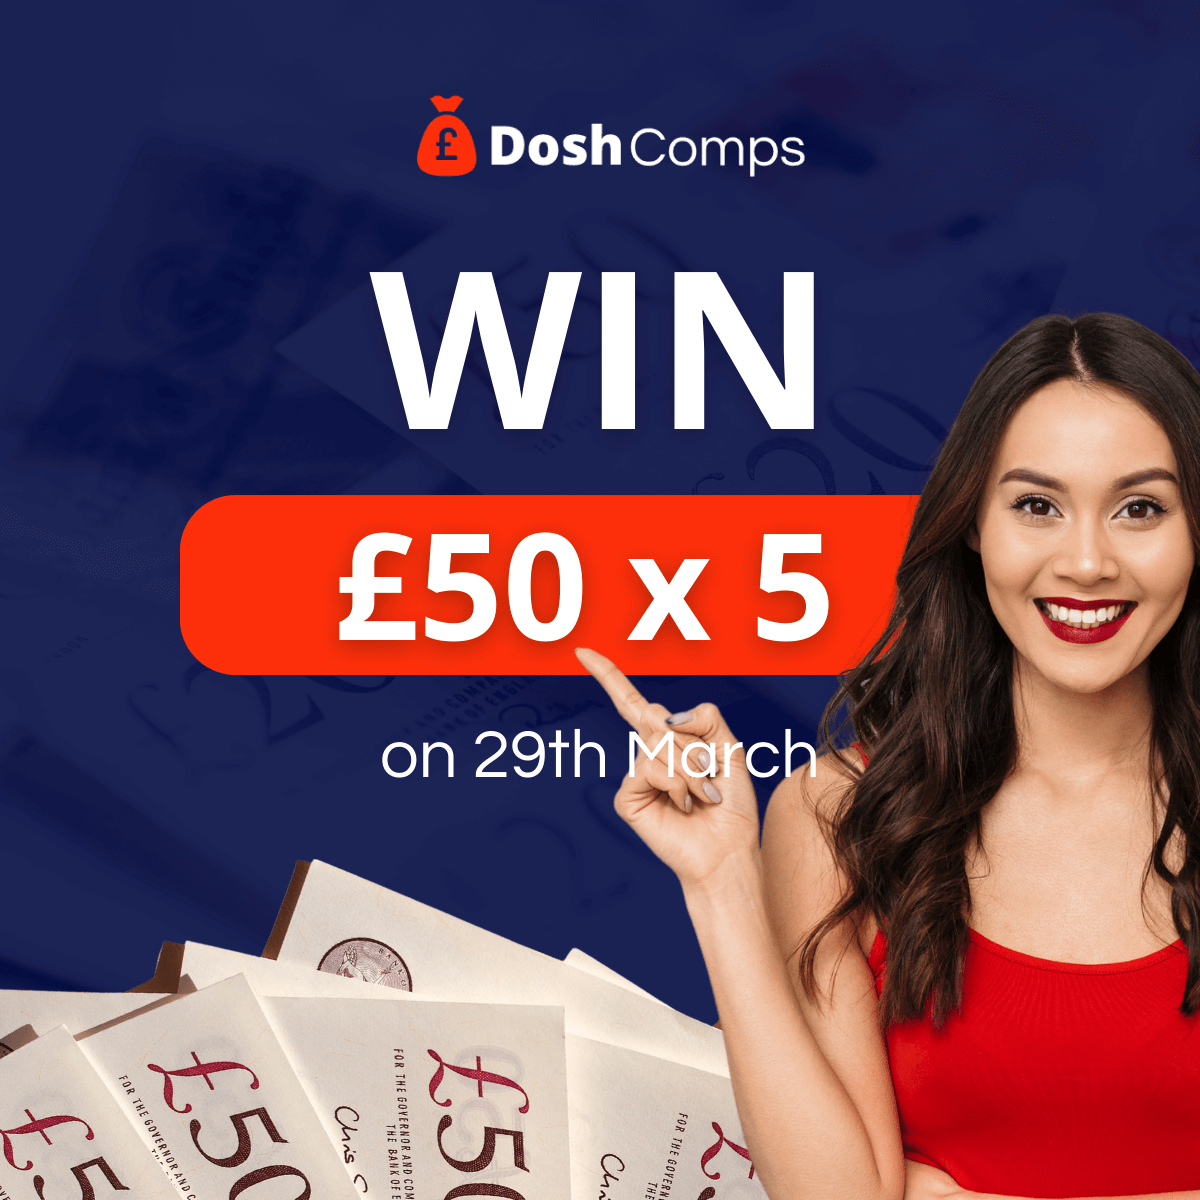 Win £50 x 5 times for just £1.99! 😀 Get in early. 👍 Tickets at 👉 doshcomps.co.uk #prizes #prizesuk #prizedraw #prizewinner #prizegiveway #winners #competitionuk #prizesuk #win #doshcomps